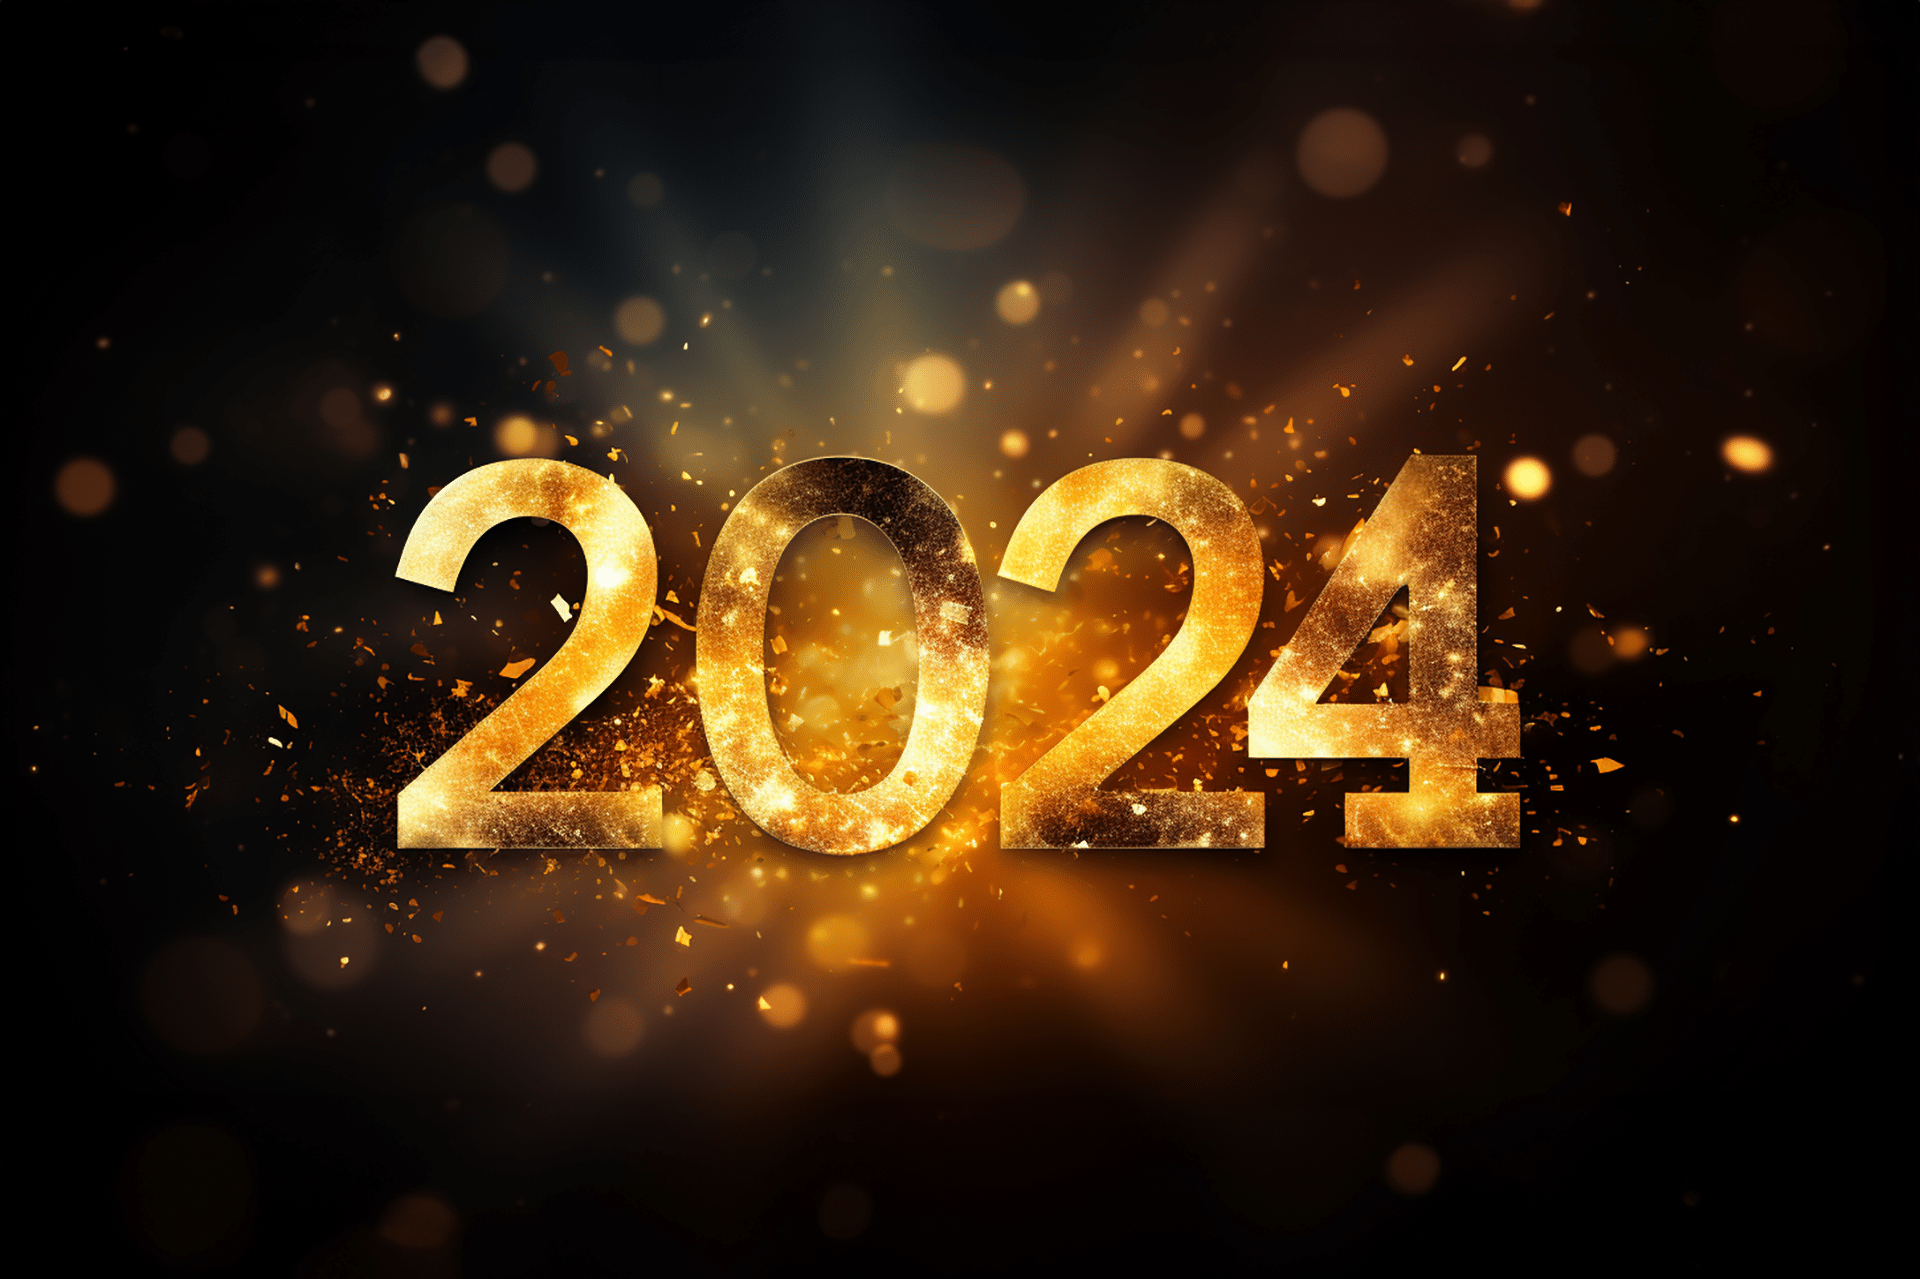 A golden happy new year 2024 number on a black background.